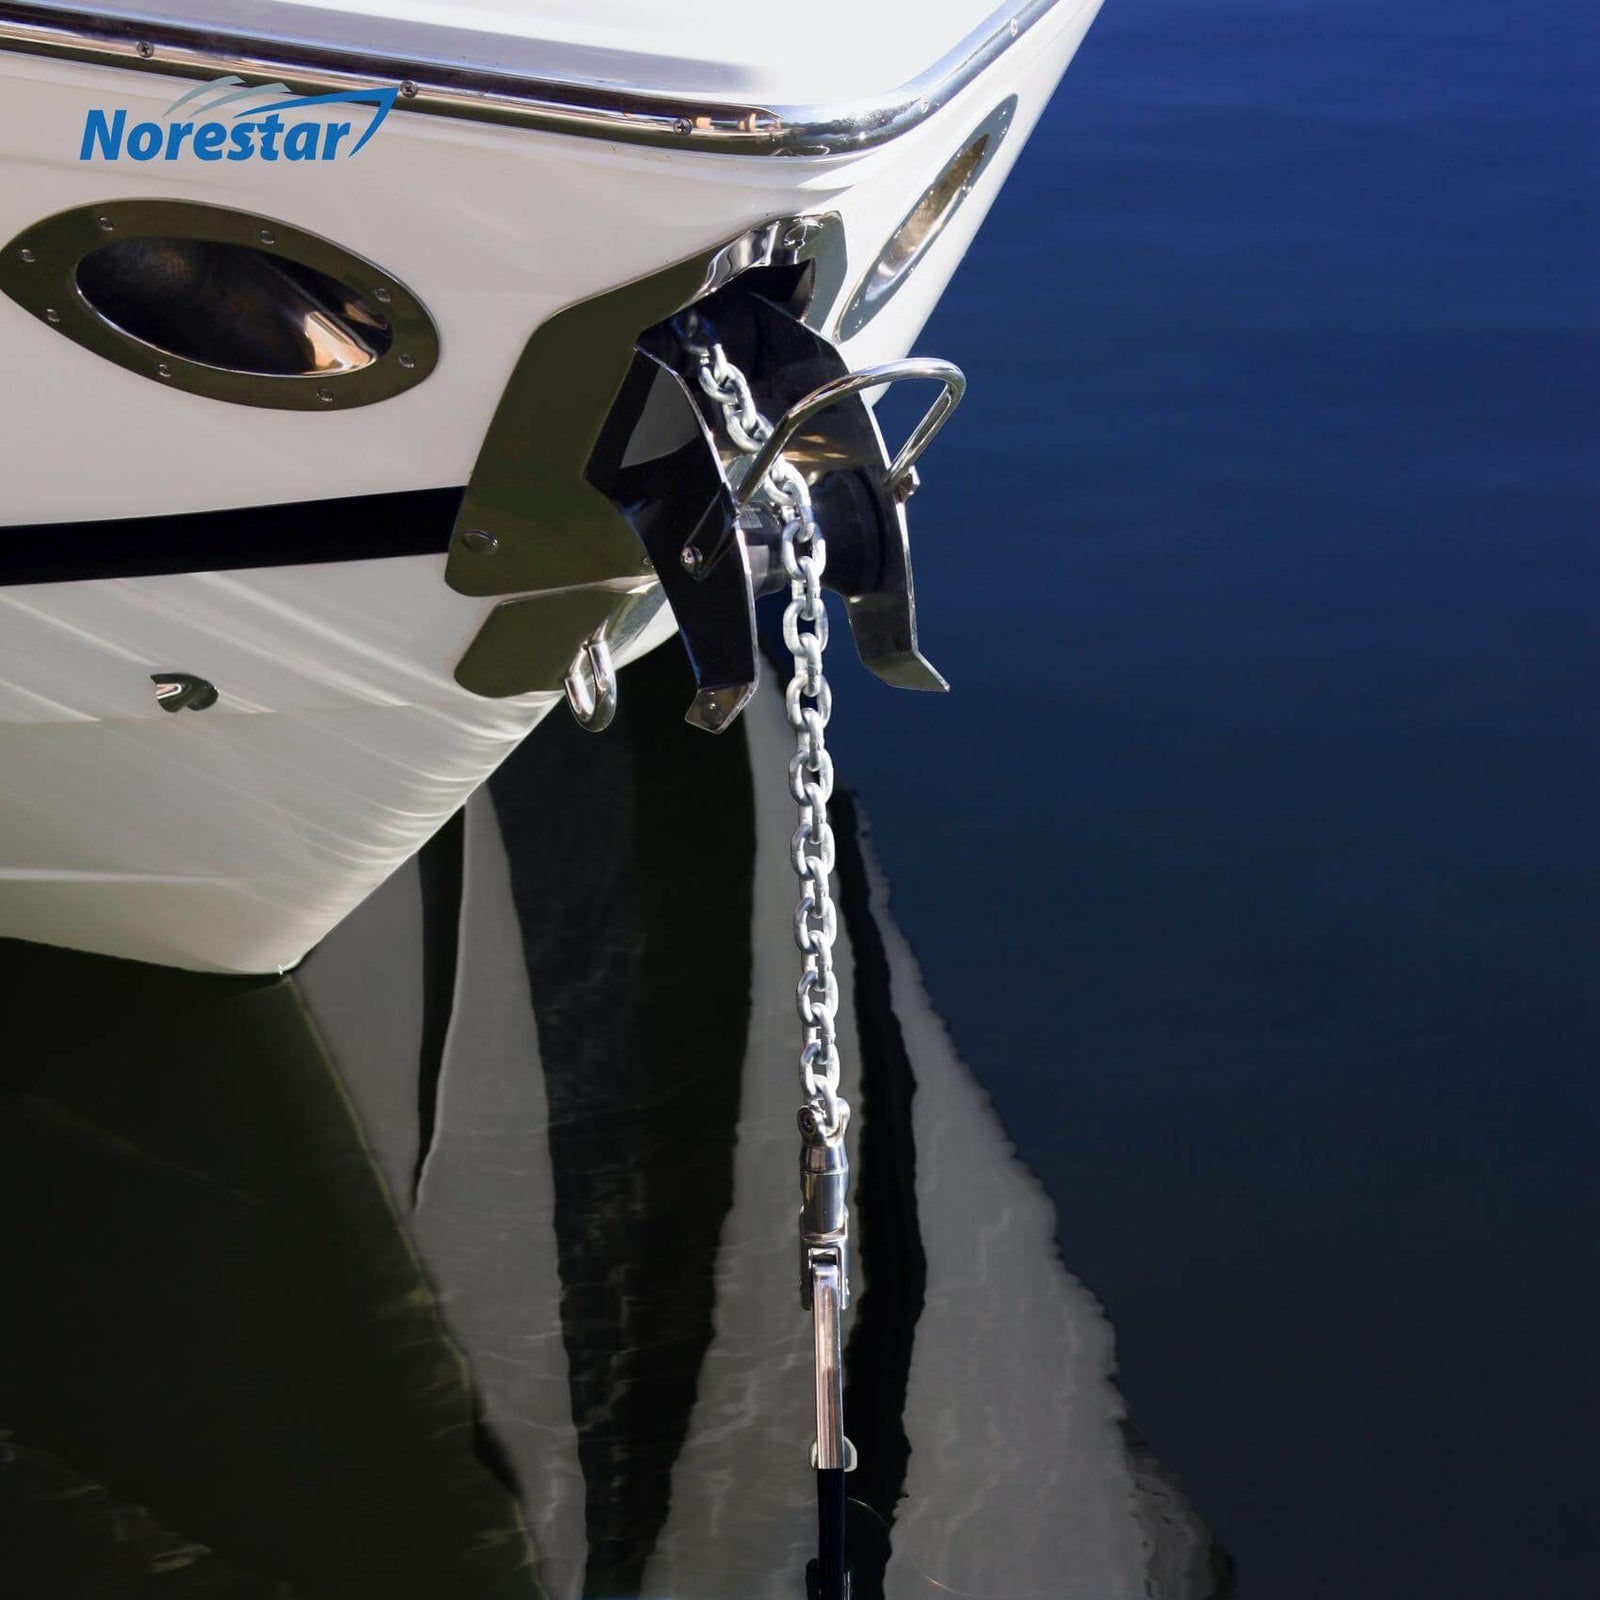 Norestar Double-Braided Nylon Anchor Rode (Windlass Rode): Anchor Rope Pre-Spliced with HT G4 Chain - In Use